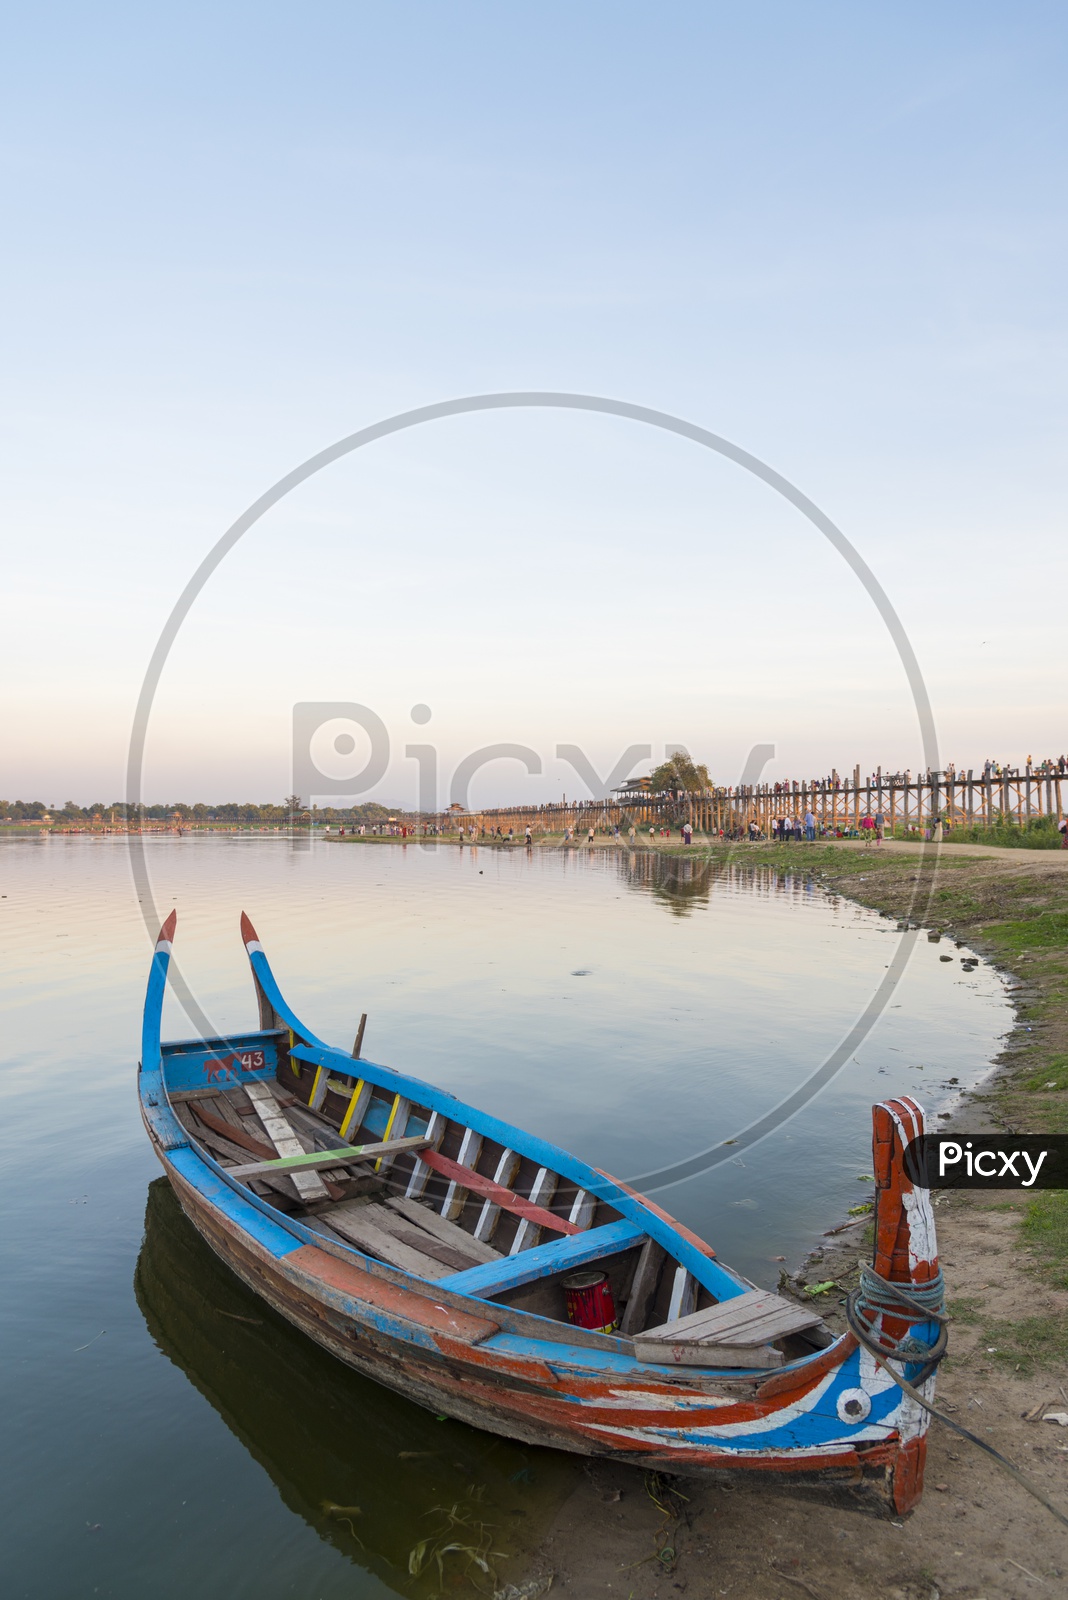 A Wooden boat during sunrise at Mandalay, Myanmar